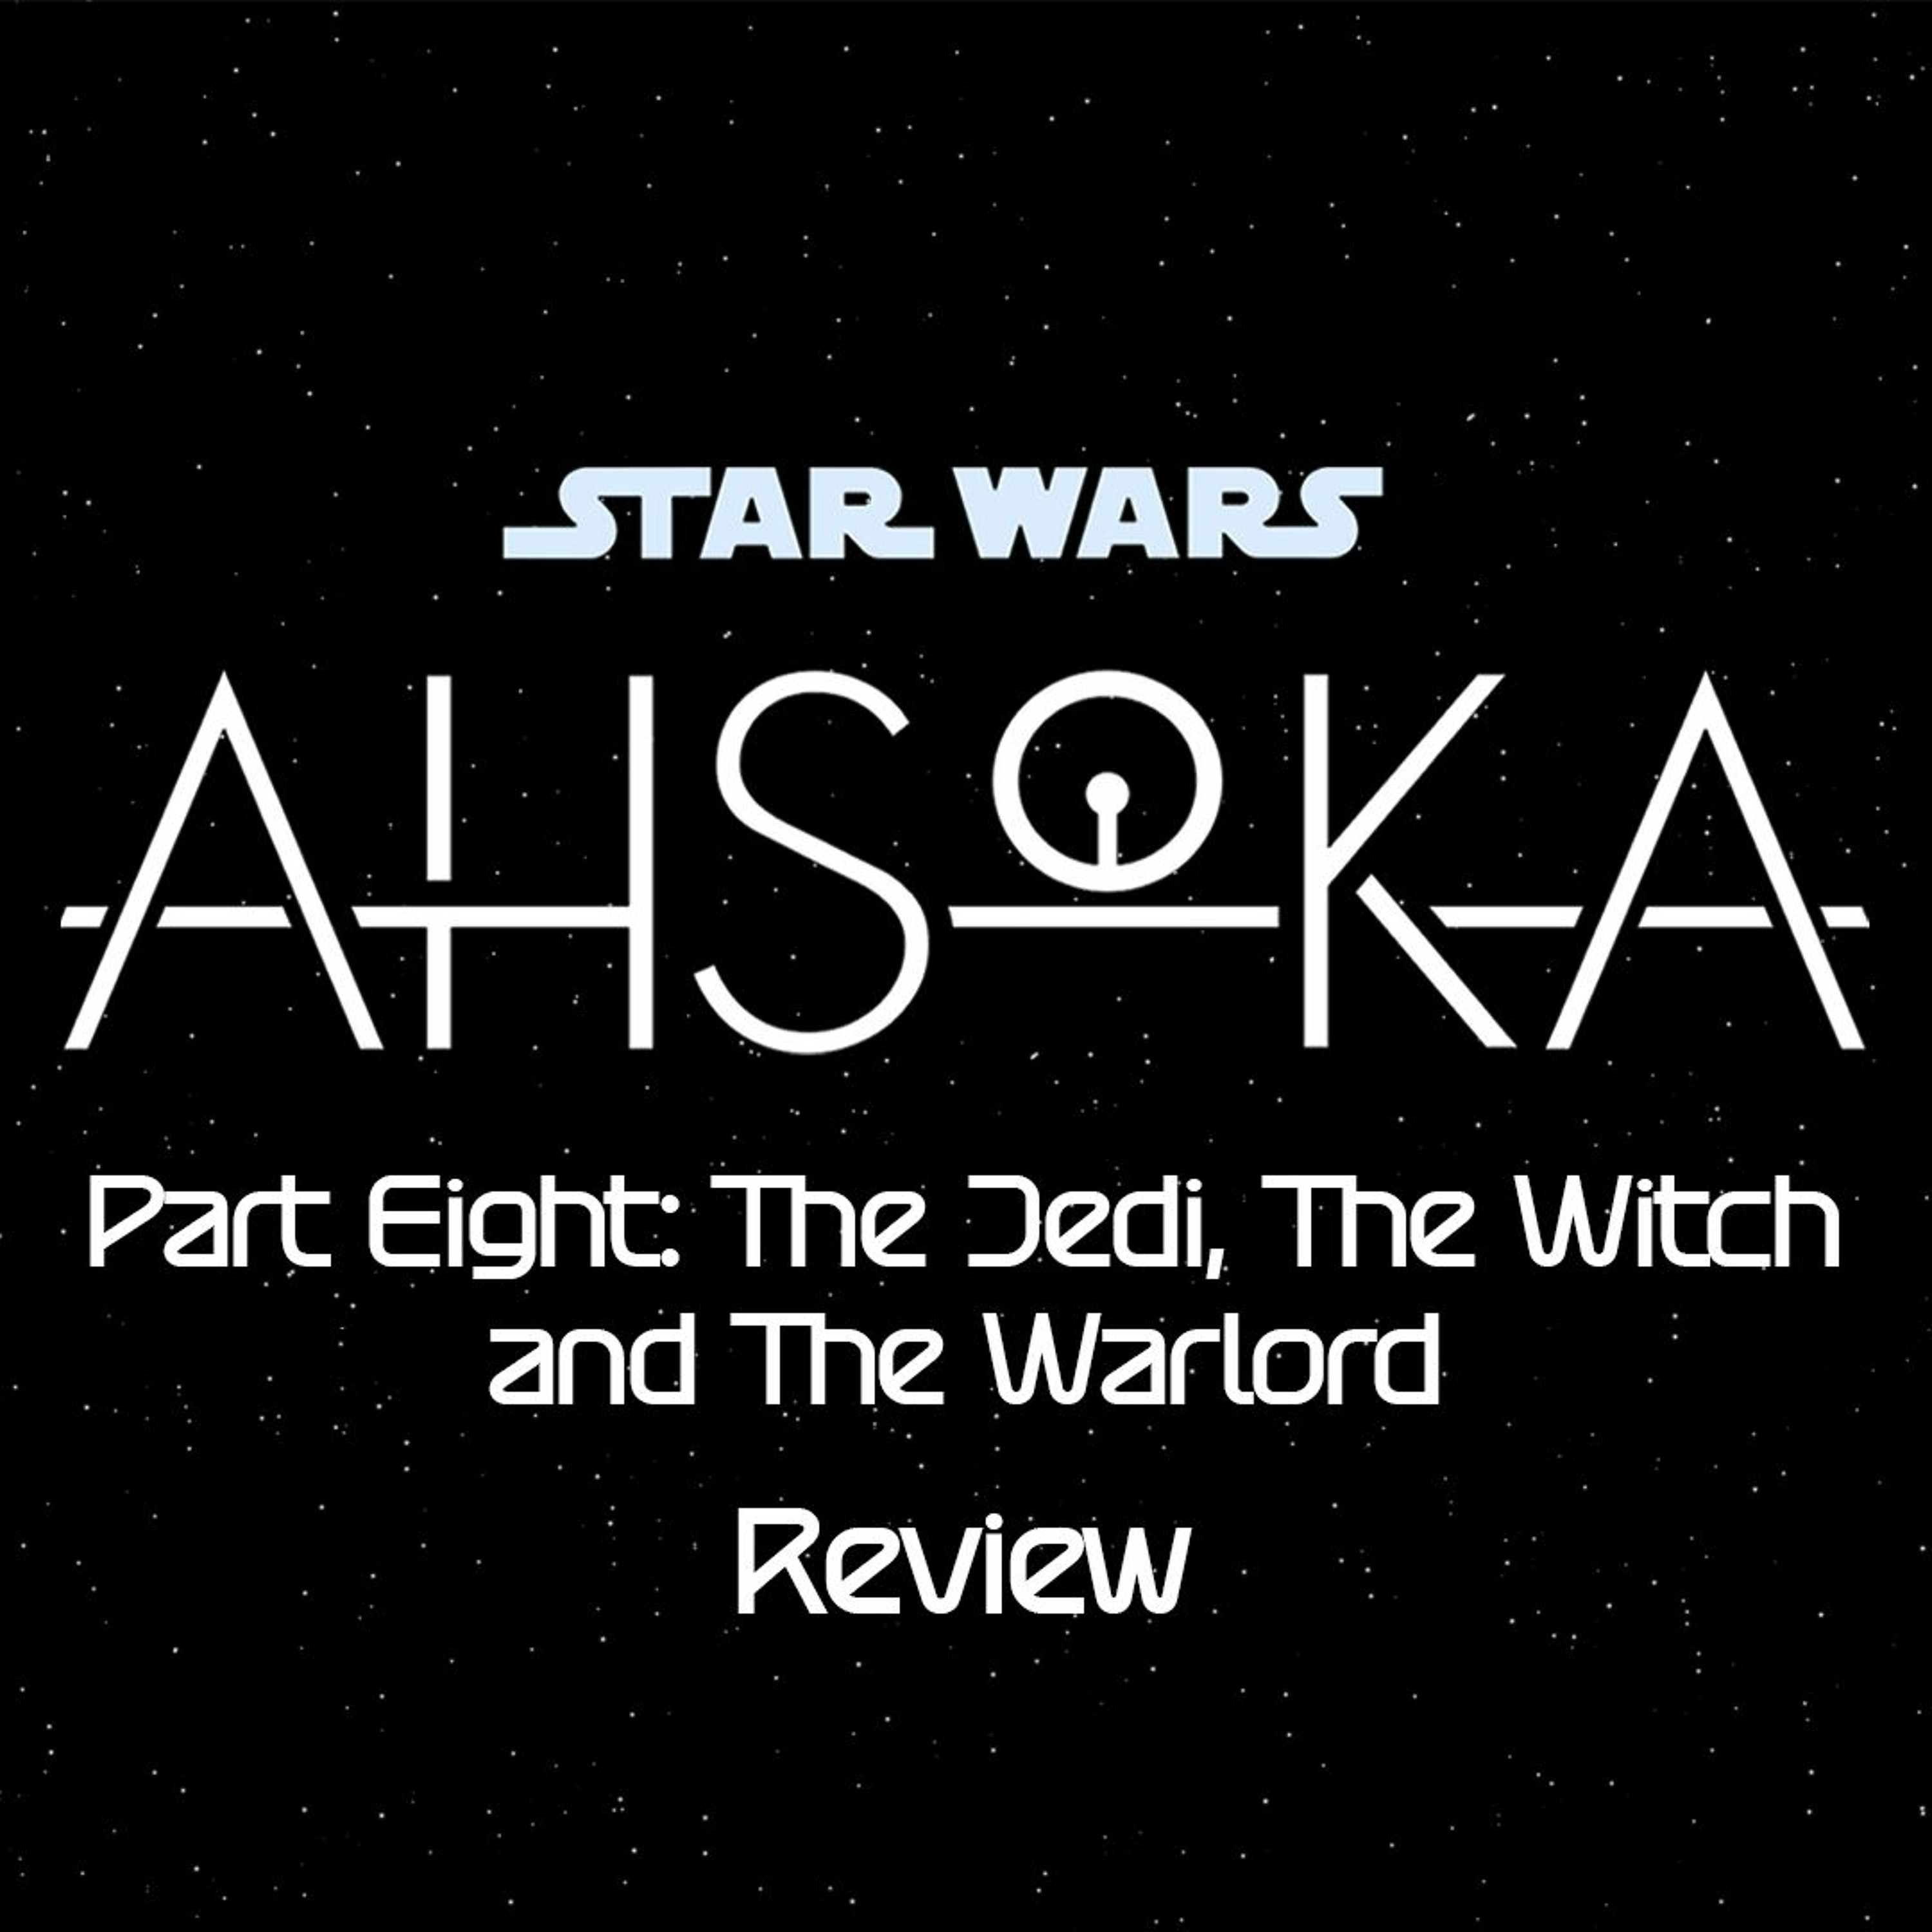 Ahsoka Part Eight: The Jedi, The Witch, and The Warlord